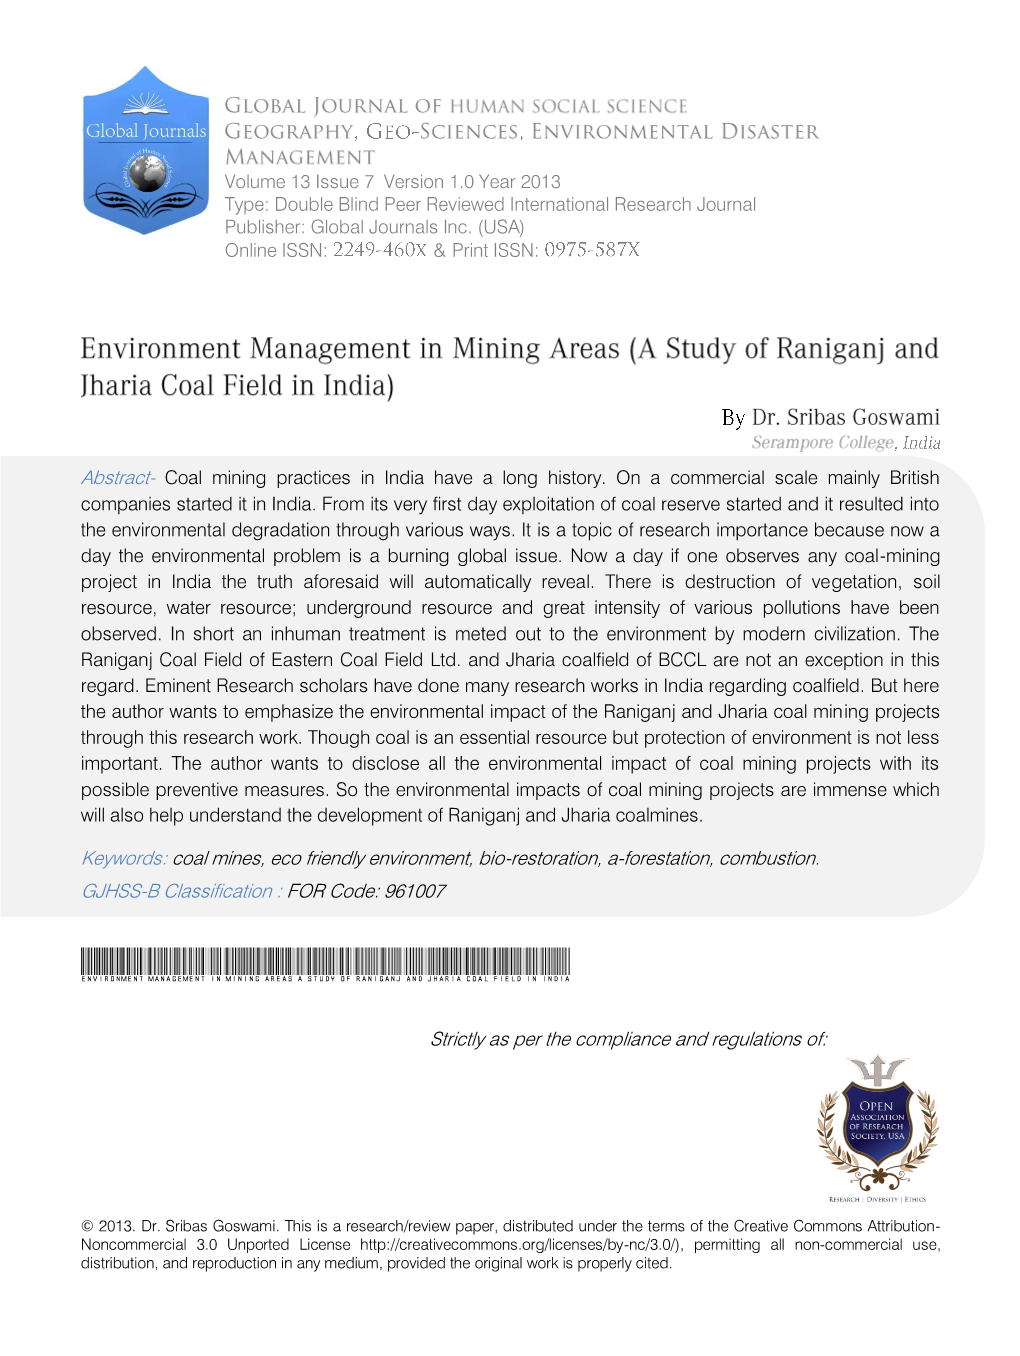 A Study of Raniganj and Jharia Coal Field in India